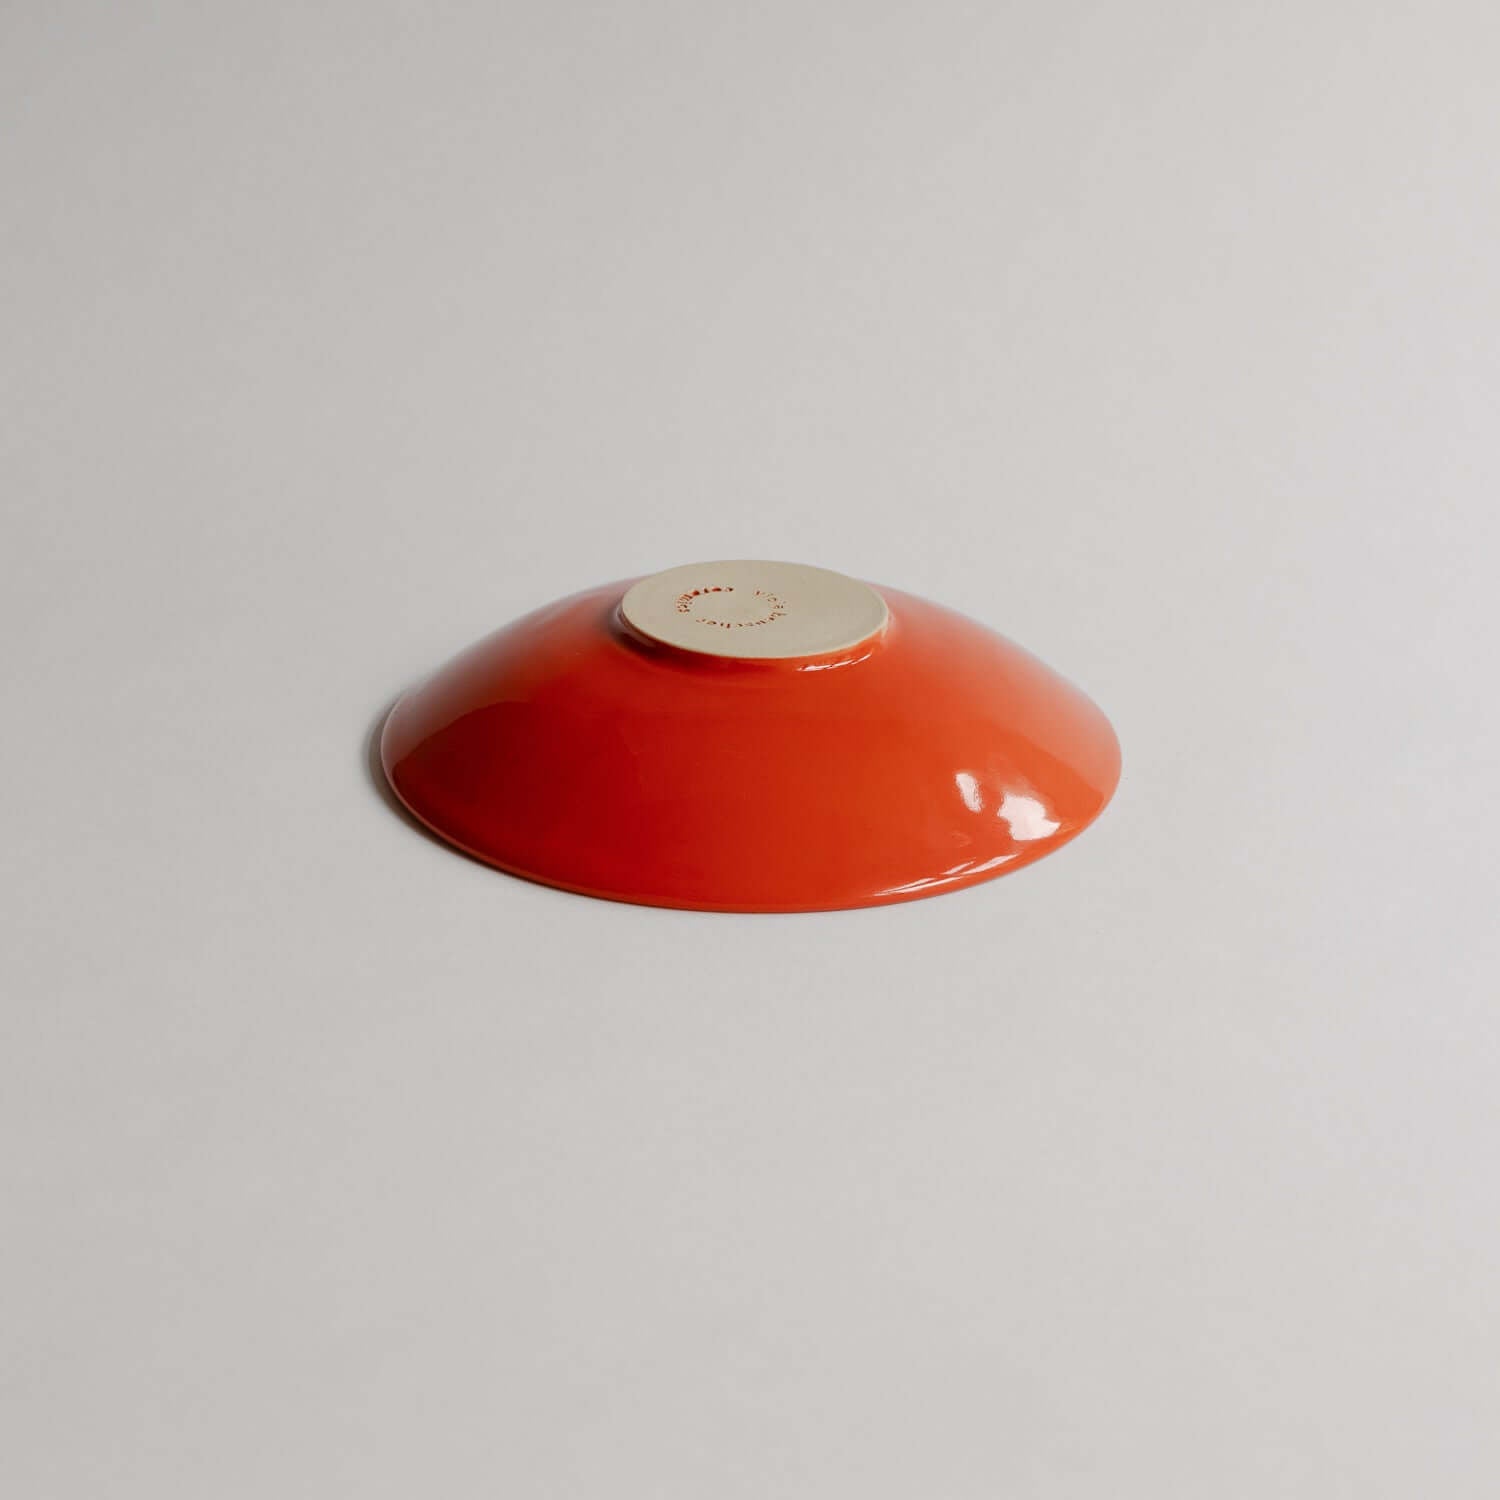 Elevate your space with the classic grey Palo Santo Dish Yun, handmade from stoneware clay and finished with a vivid red glaze. Each piece is one-of-a-kind. von viola beuscher ceramics